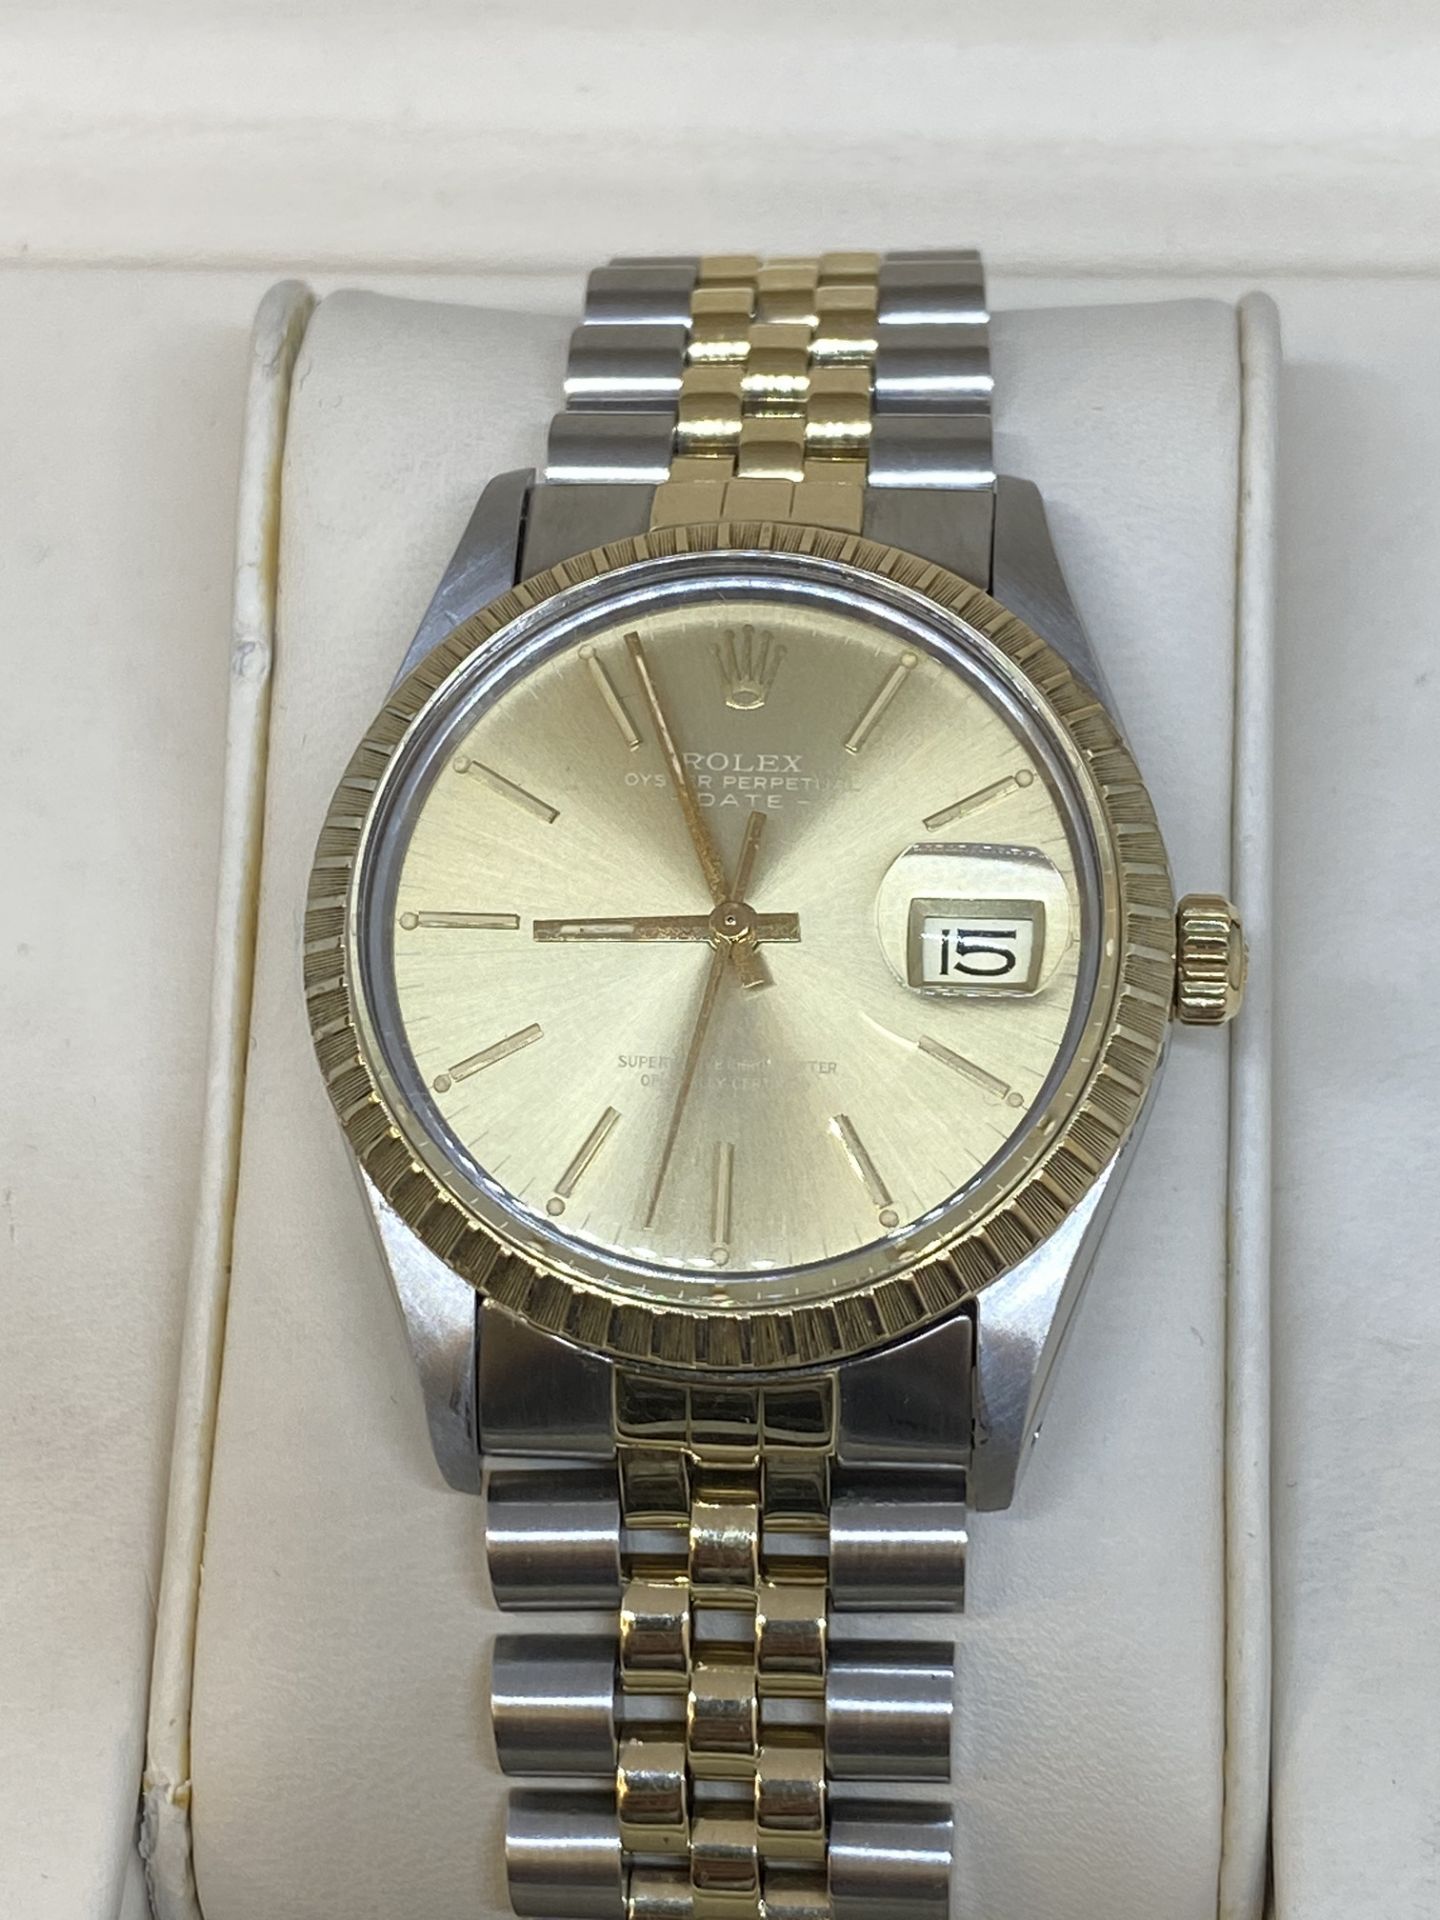 GOLD & STAINLESS ROLEX WATCH - Image 2 of 10